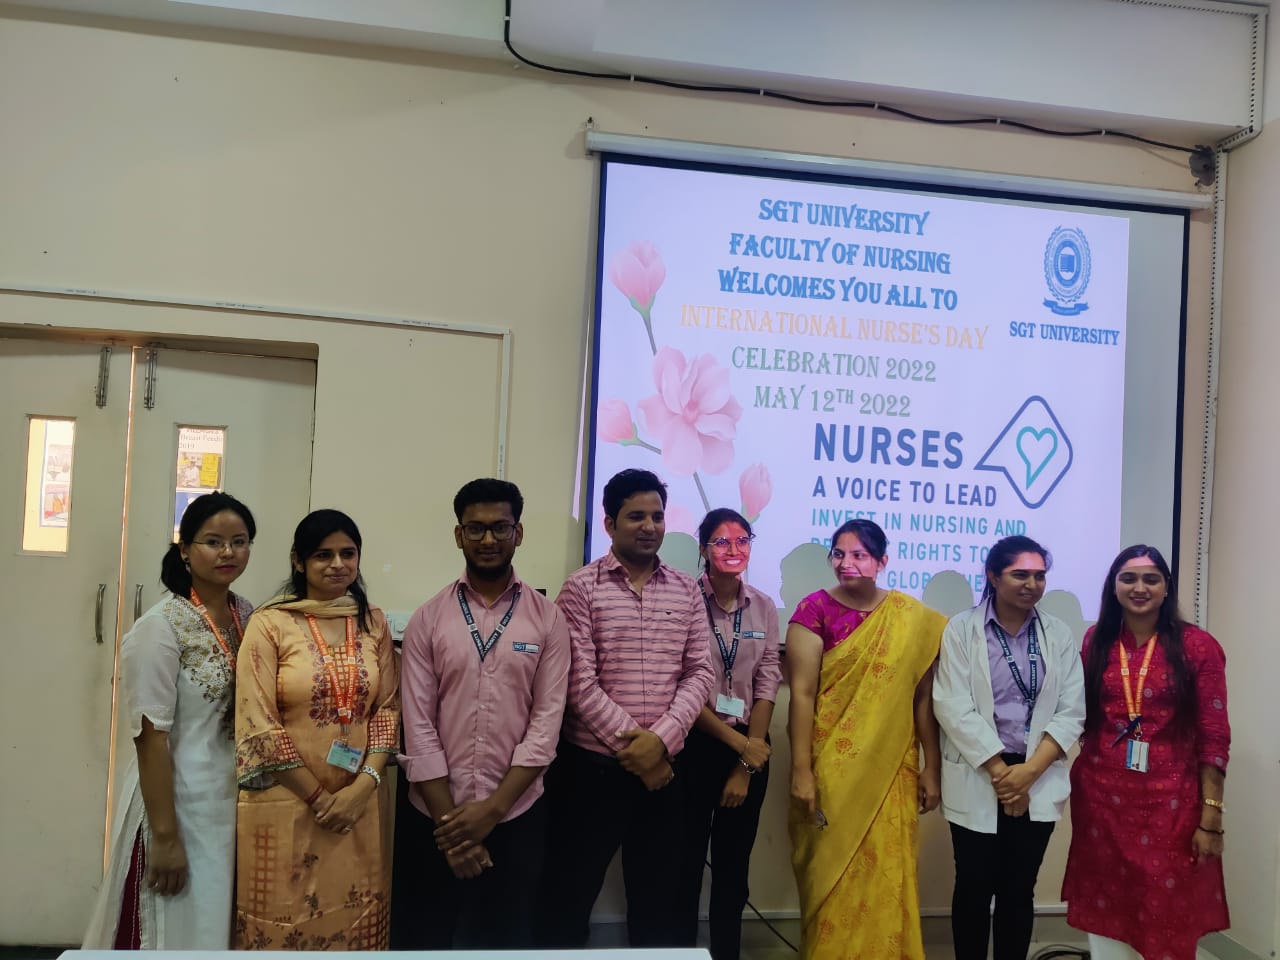 THE FACULTY OF  NURSING, SGT UNIVERSITY CELEBRATED INTERNATIONAL NURSES DAY ON 12TH MAY 2022